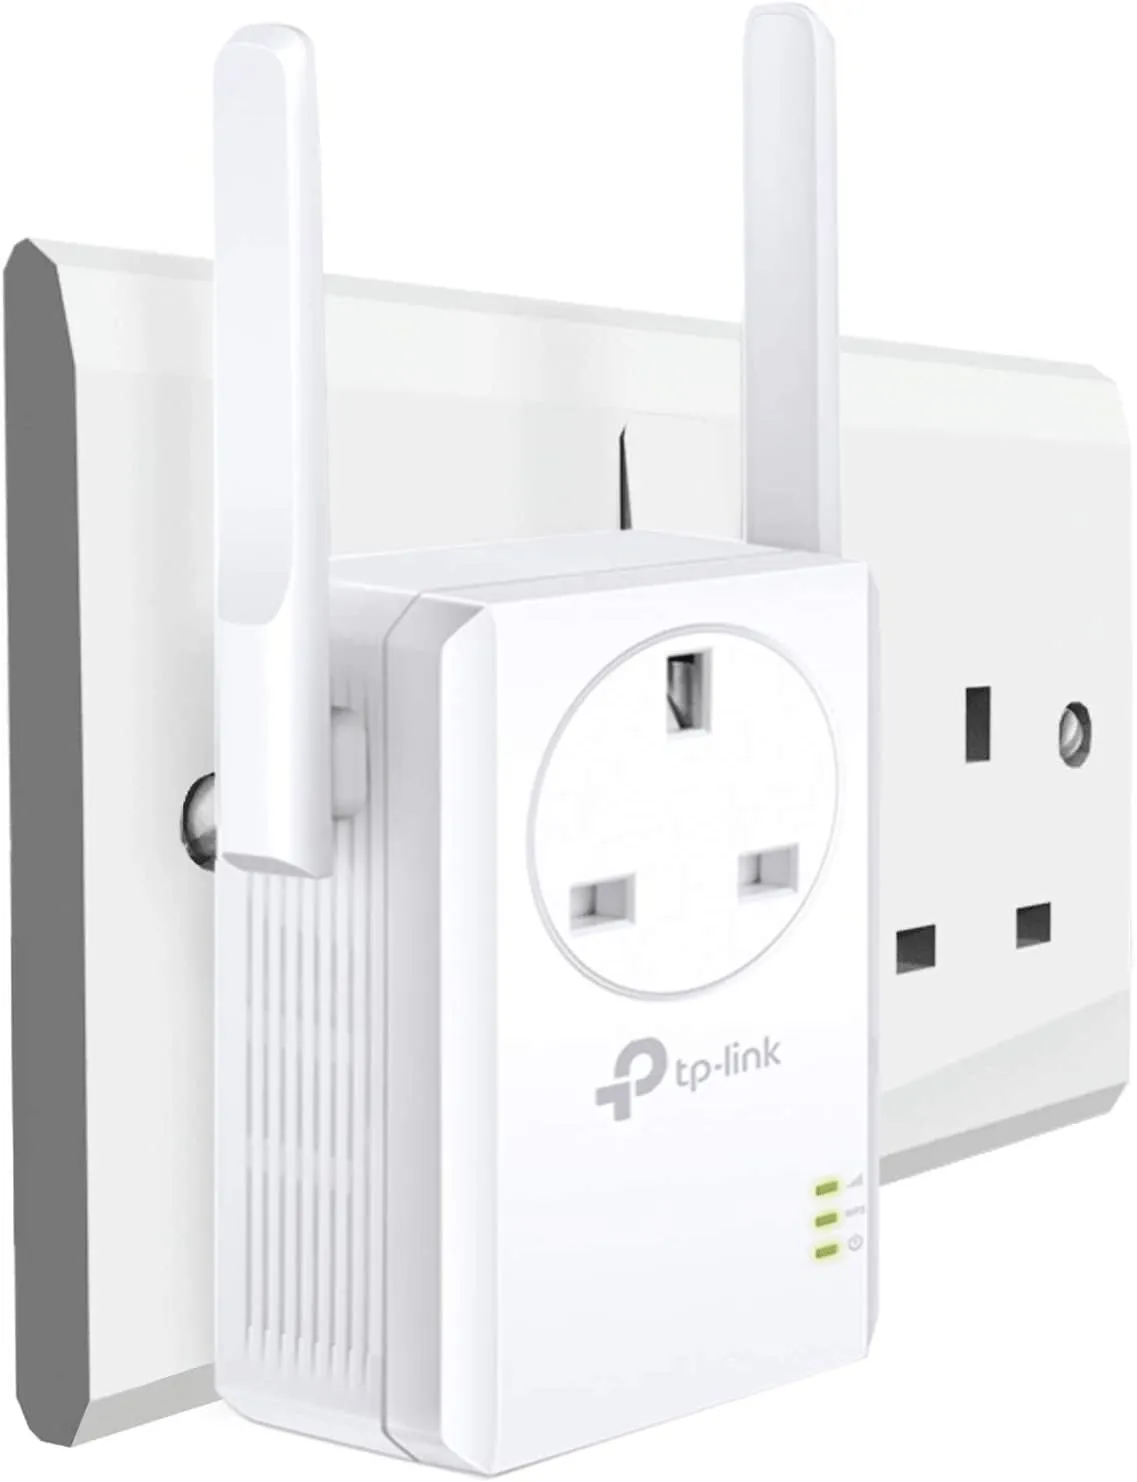 Universal Range Extender with Extra Power Outlet